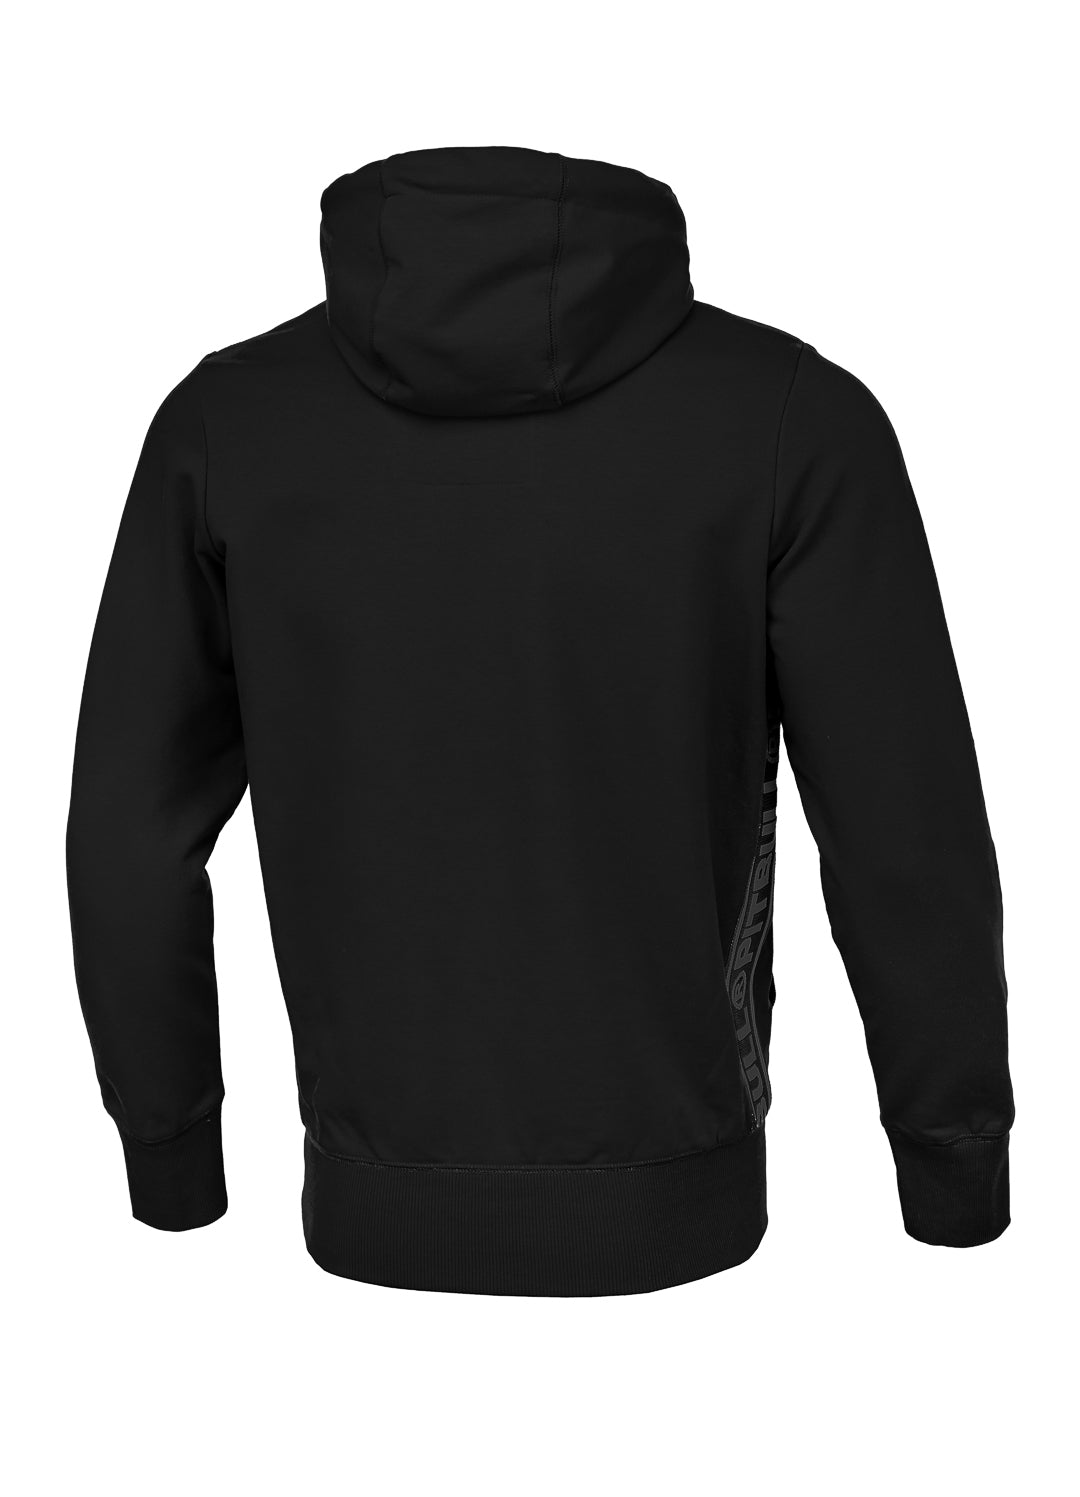 HINSON French Terry Black Hoodie.